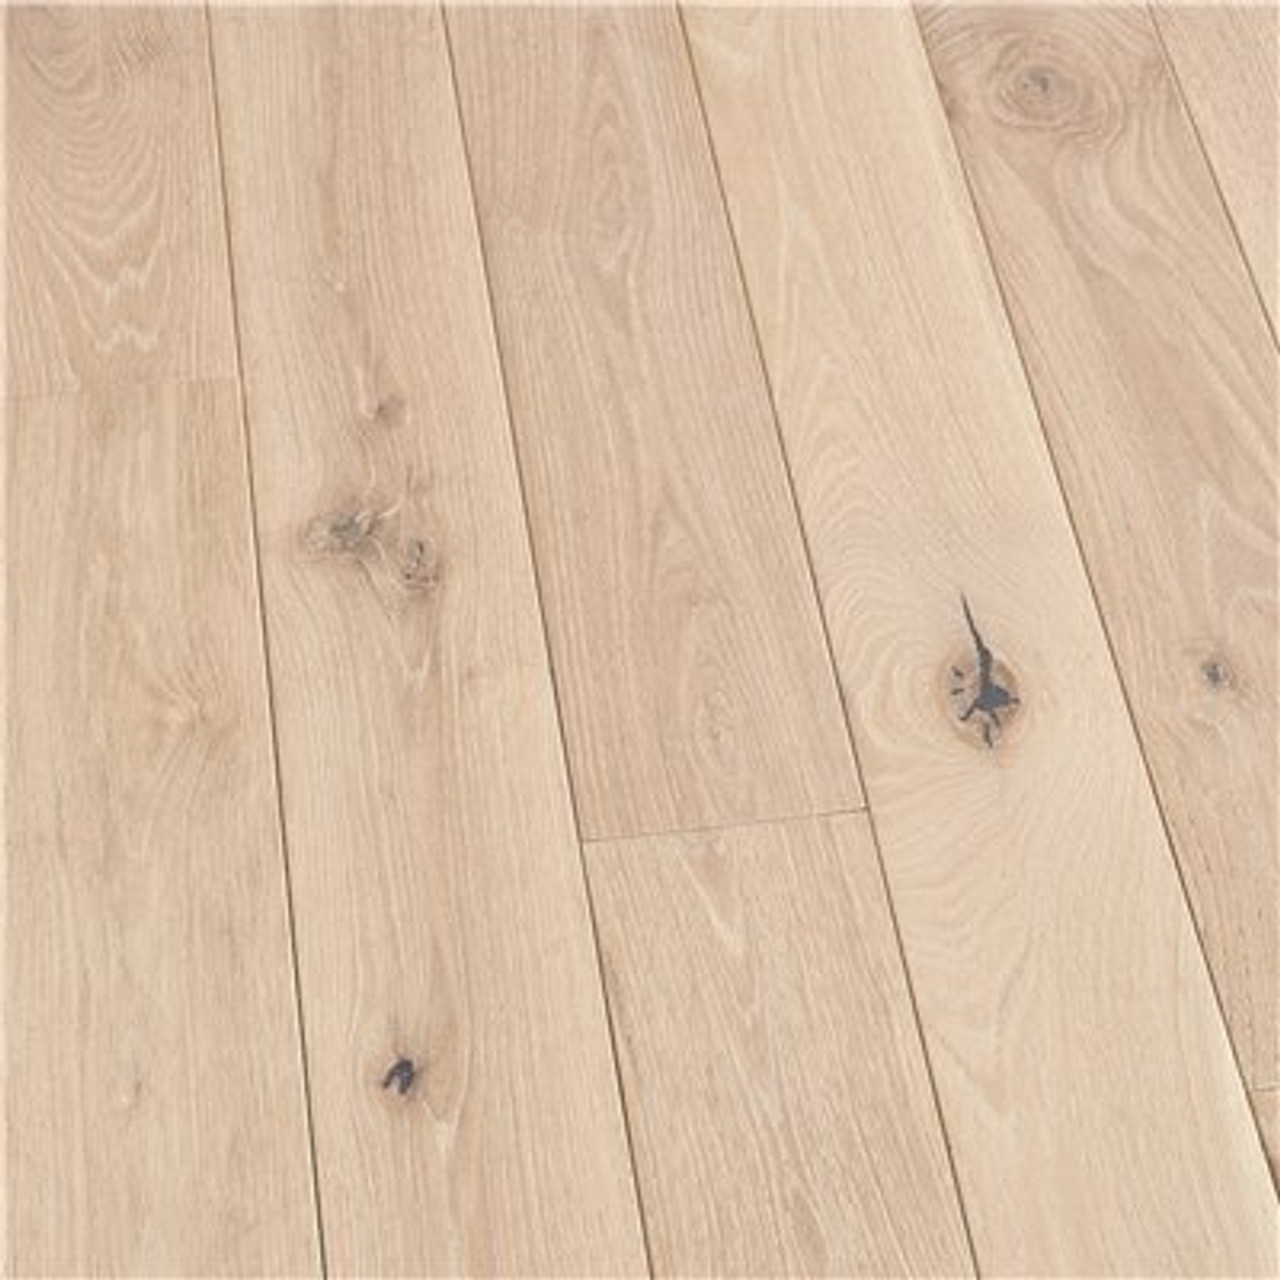 French Oak Pelican Hill 3/4 In. Thick X 5 In. Wide X Varying Length Solid Hardwood Flooring (22.60 Sq. Ft./Case)